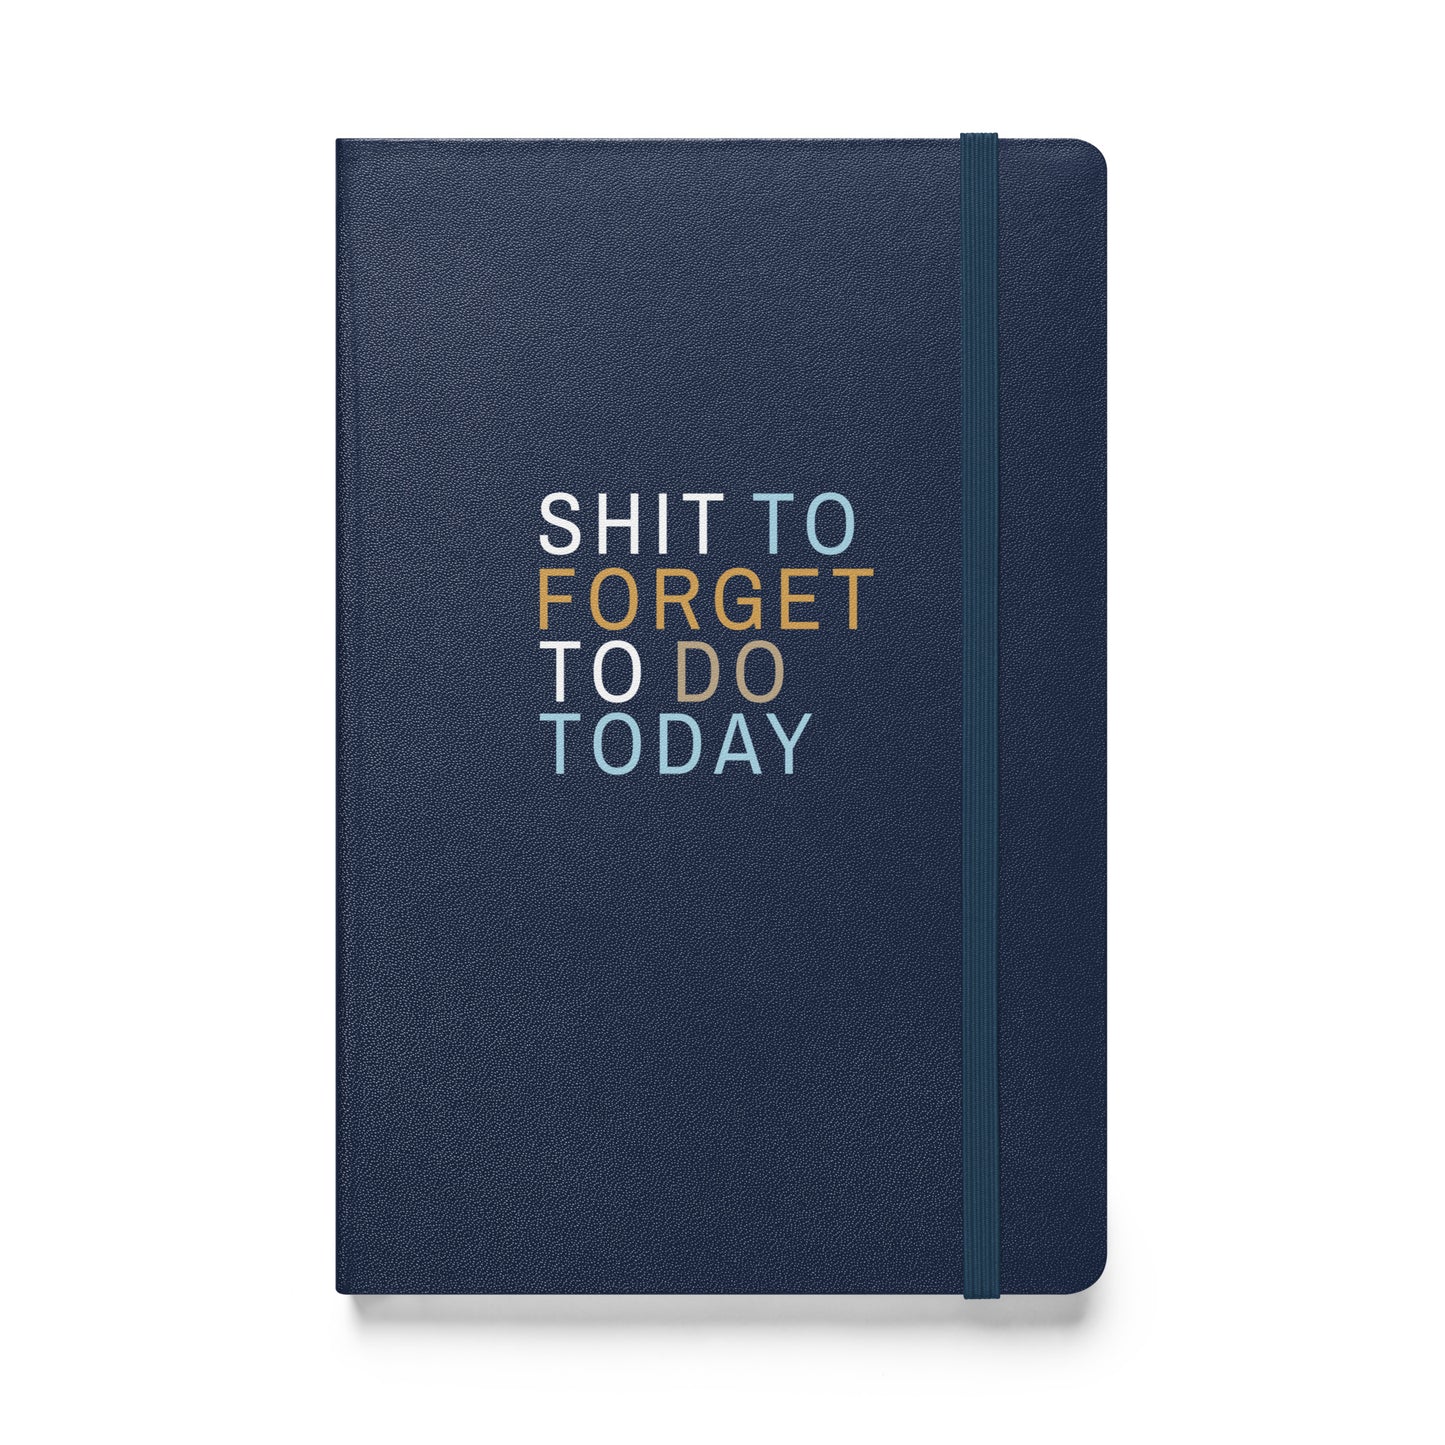 Sh*t to Forget to Do Today hardcover bound notebook